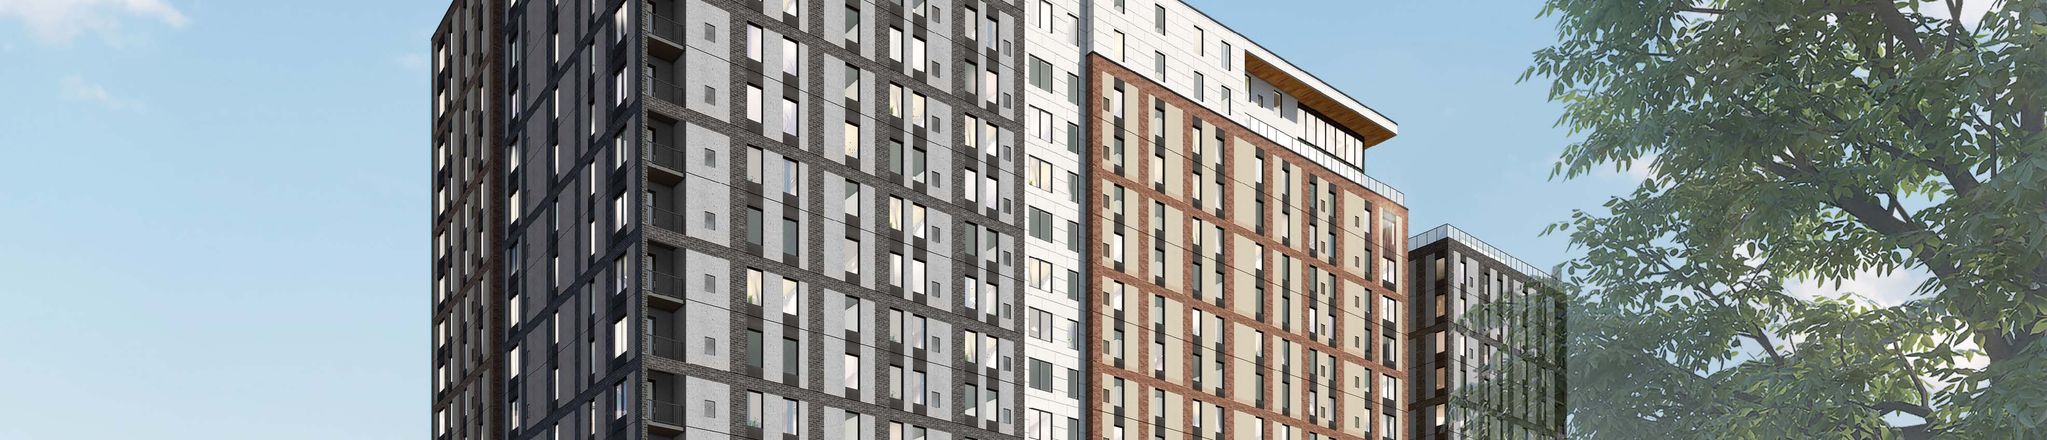 rendering of the standard at dinkytown from street view